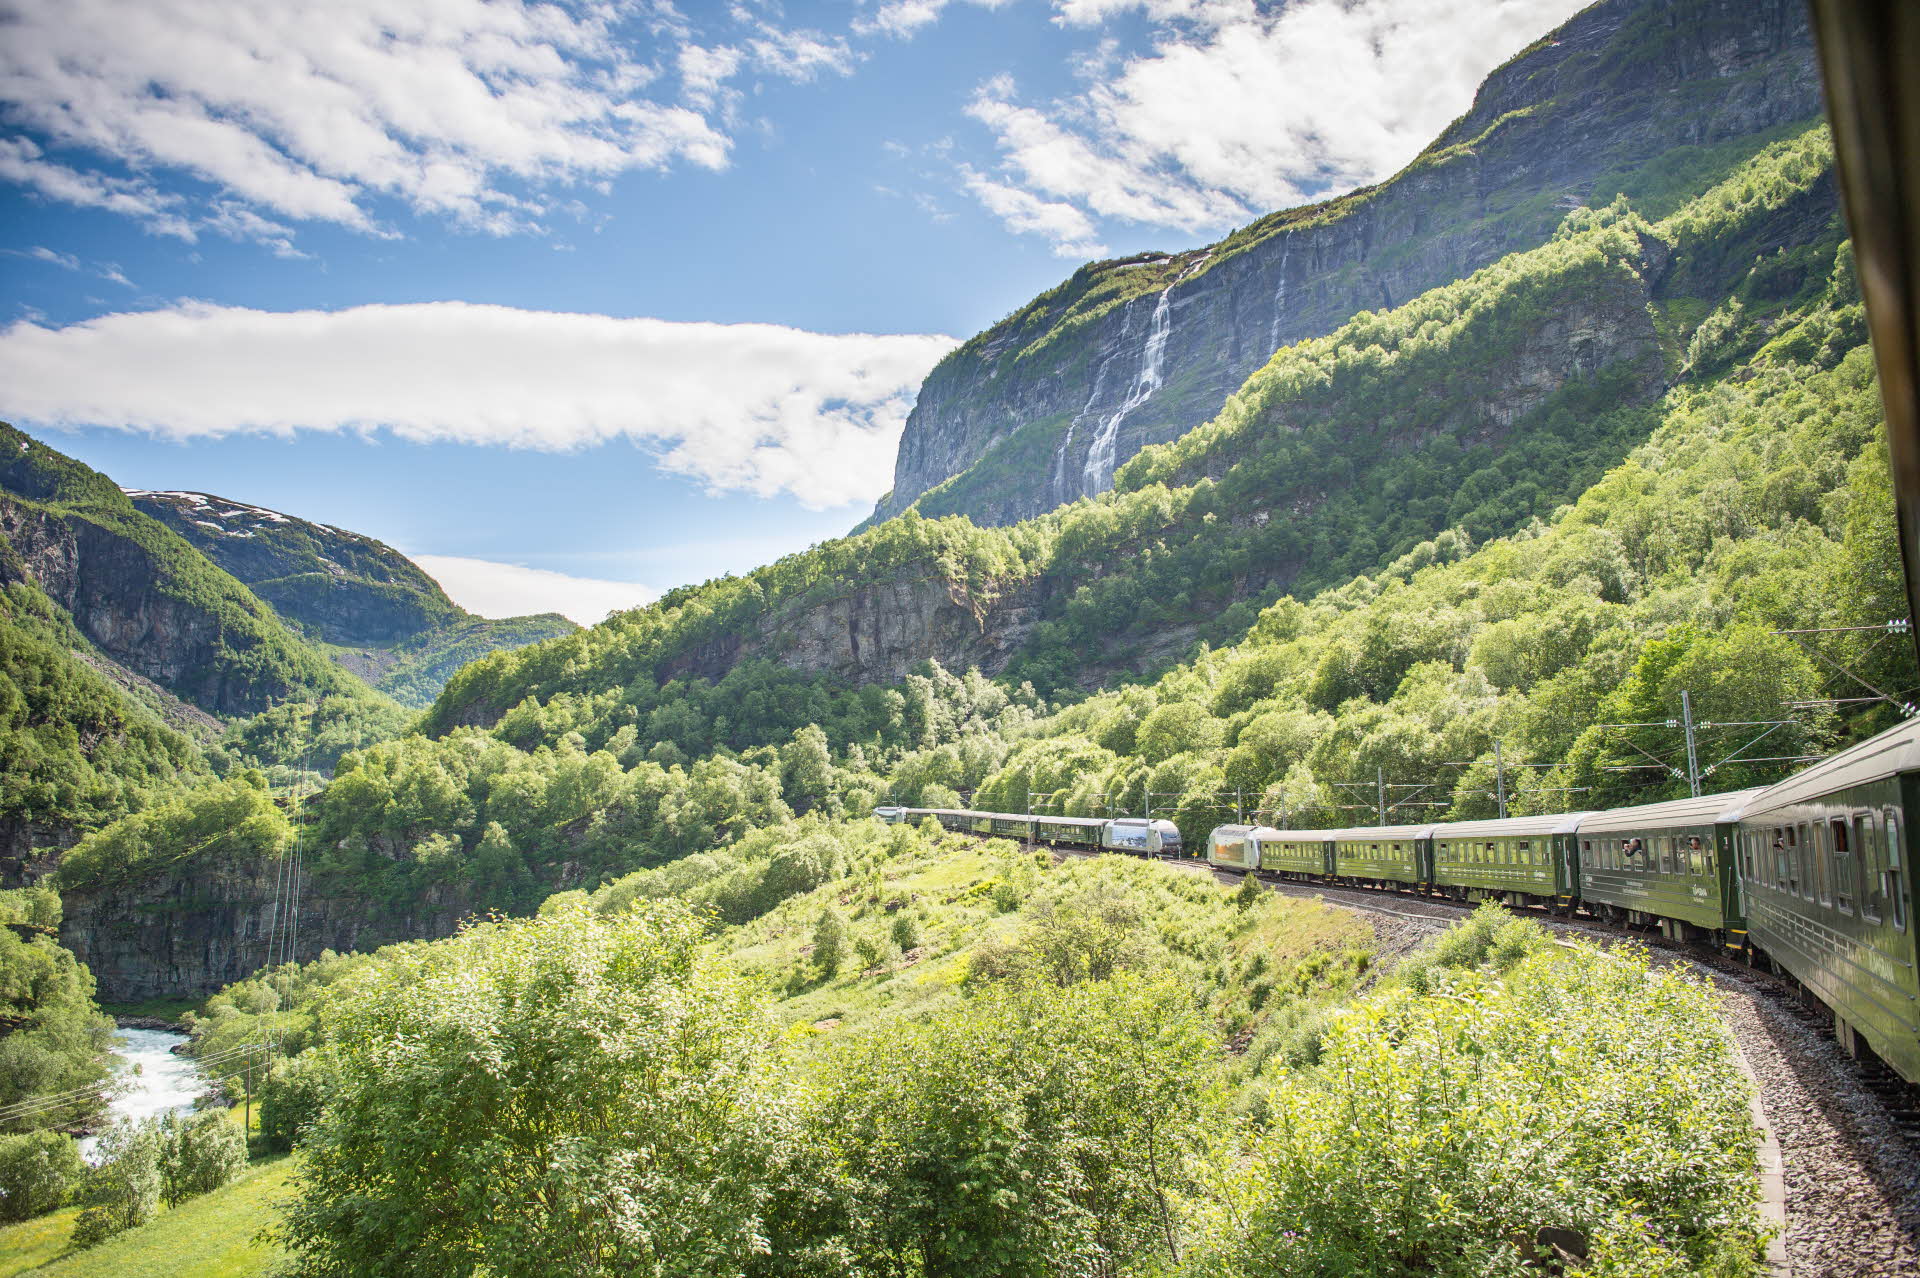 Two trains on the Flåm Railway meet in a rich green valley in summer